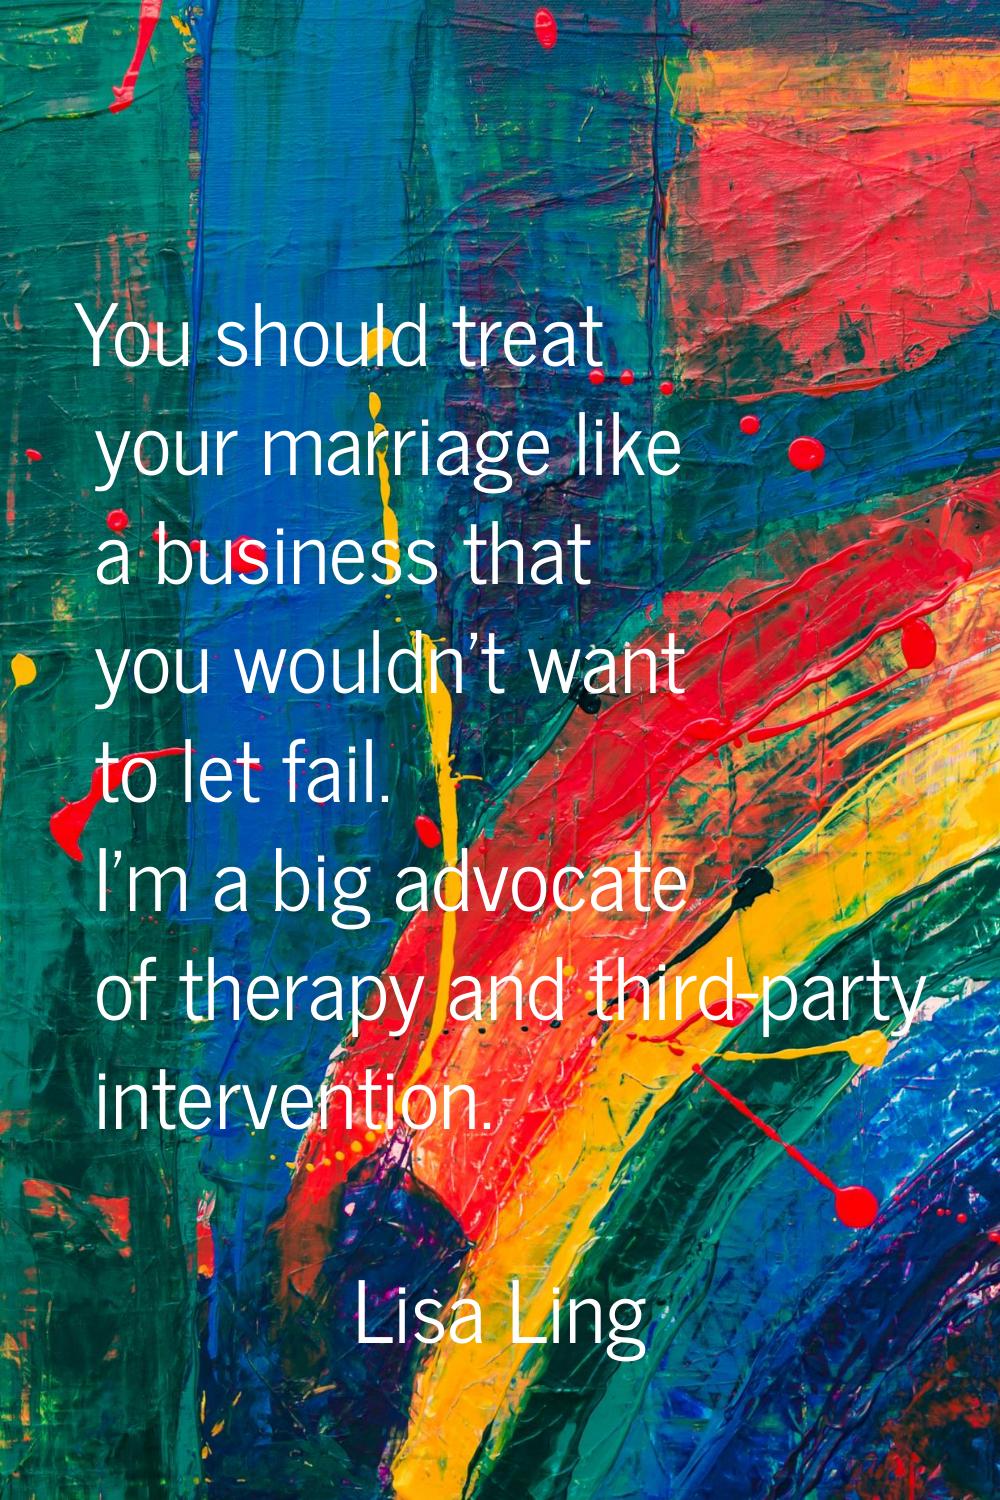 You should treat your marriage like a business that you wouldn't want to let fail. I'm a big advoca